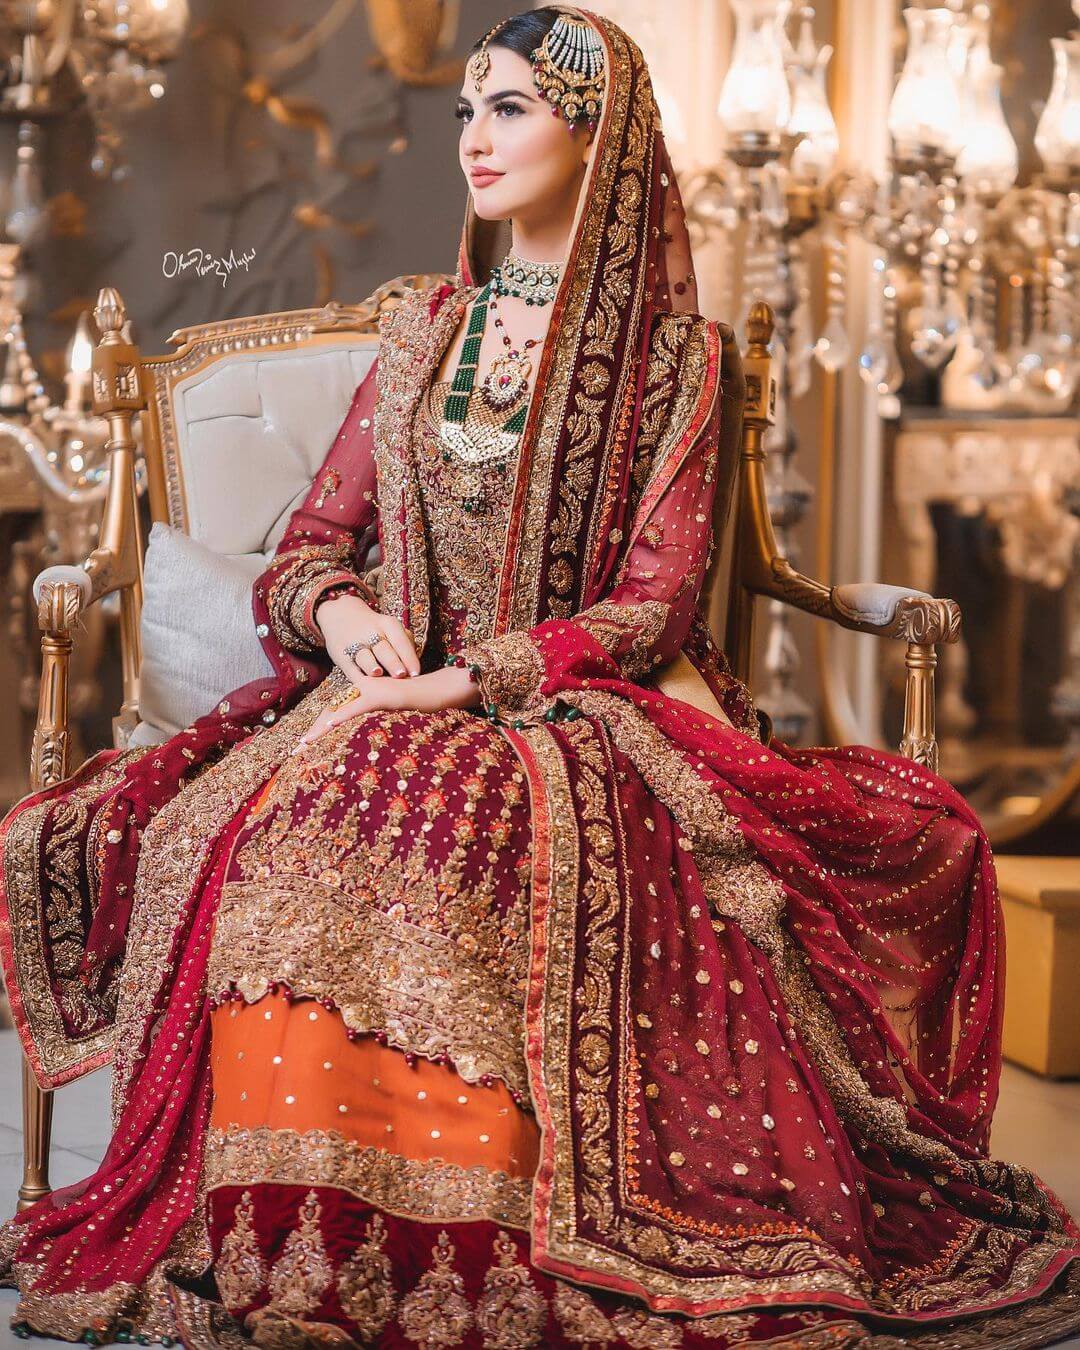 A Mesmerizing Bridal Outfit: Combining Maroon, Wine-Red, and Tangerine with Zardozi, Zari, Tilla, and Mirror Work